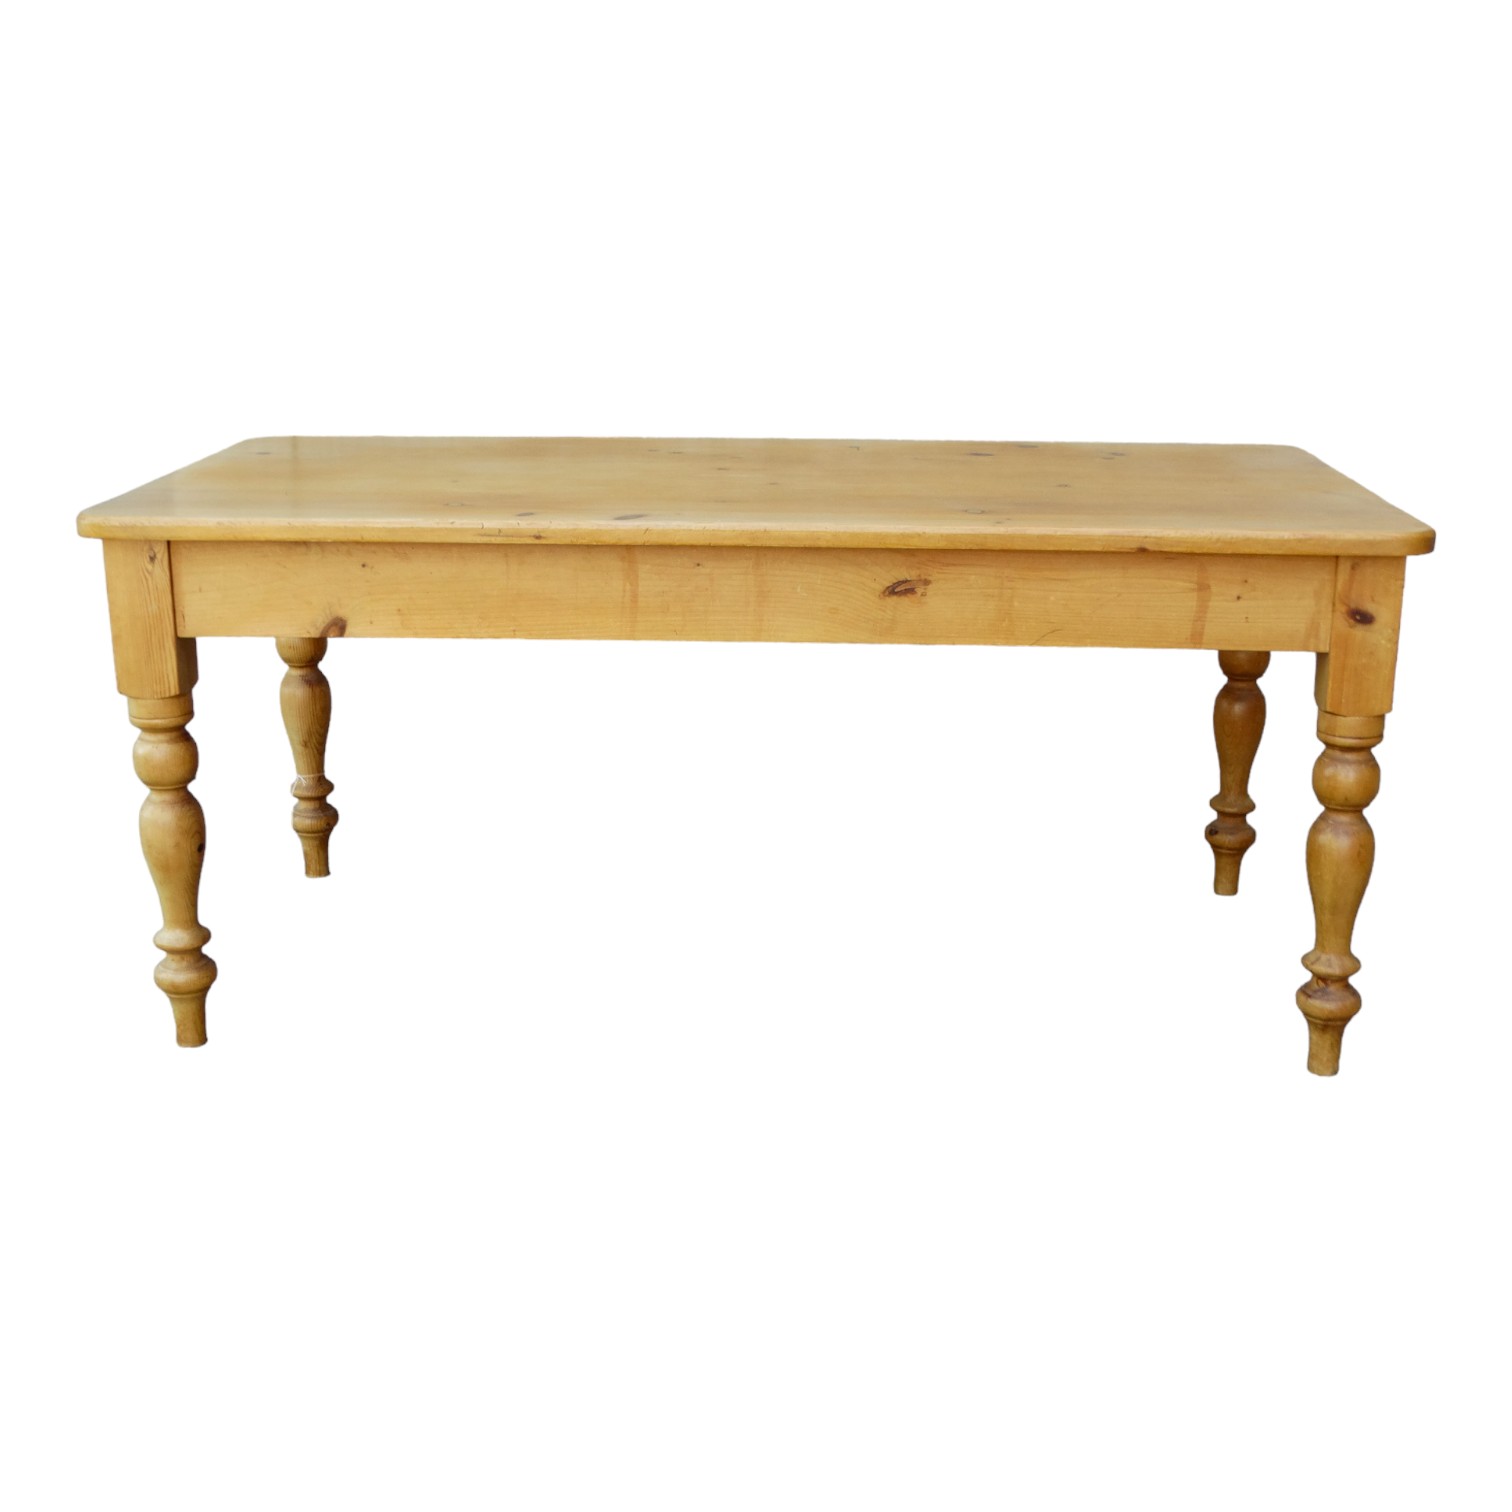 A 20th century pine kitchen table - with a rectangular plank top and raised on turned legs, 182 x 90